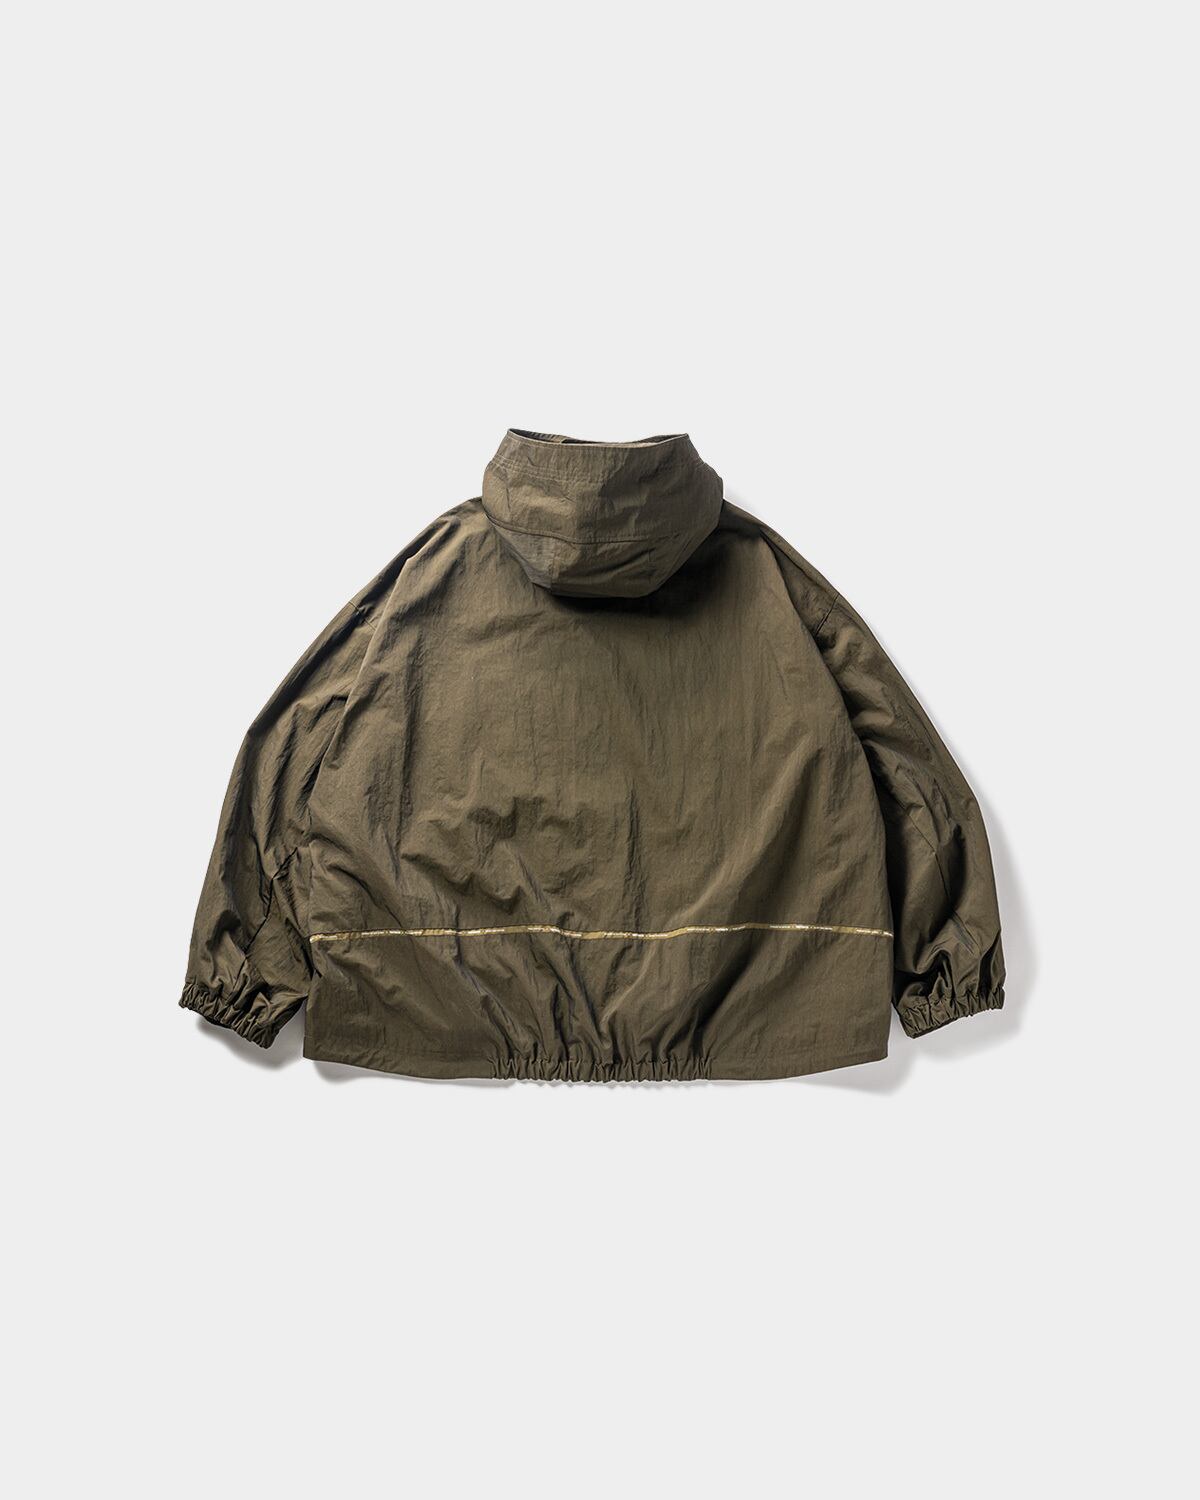 TIGHTBOOTH HUNTING JKT OLIVE-